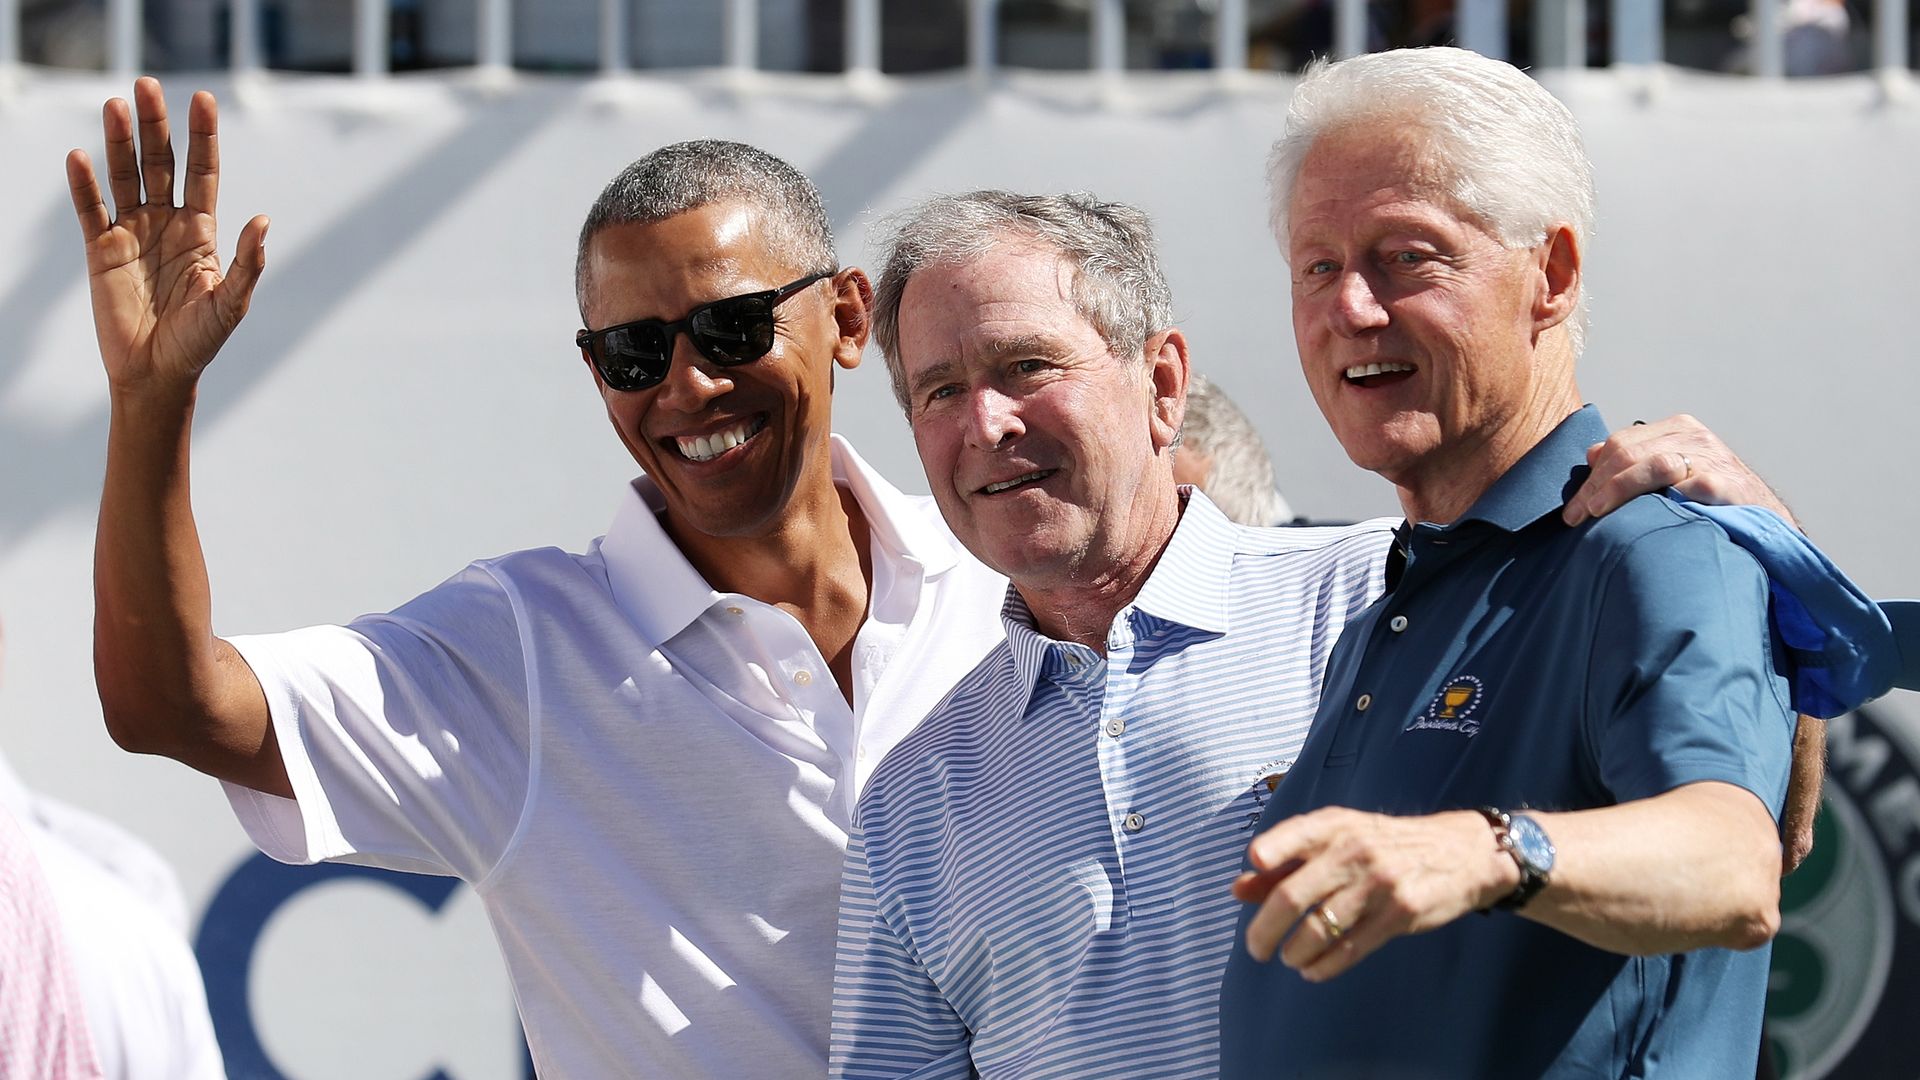 Former U.S. Presidents Barack Obama, George W. Bush and Bill Clinton  at Liberty National Golf Club on September 28, 2017 in Jersey City, New Jersey.